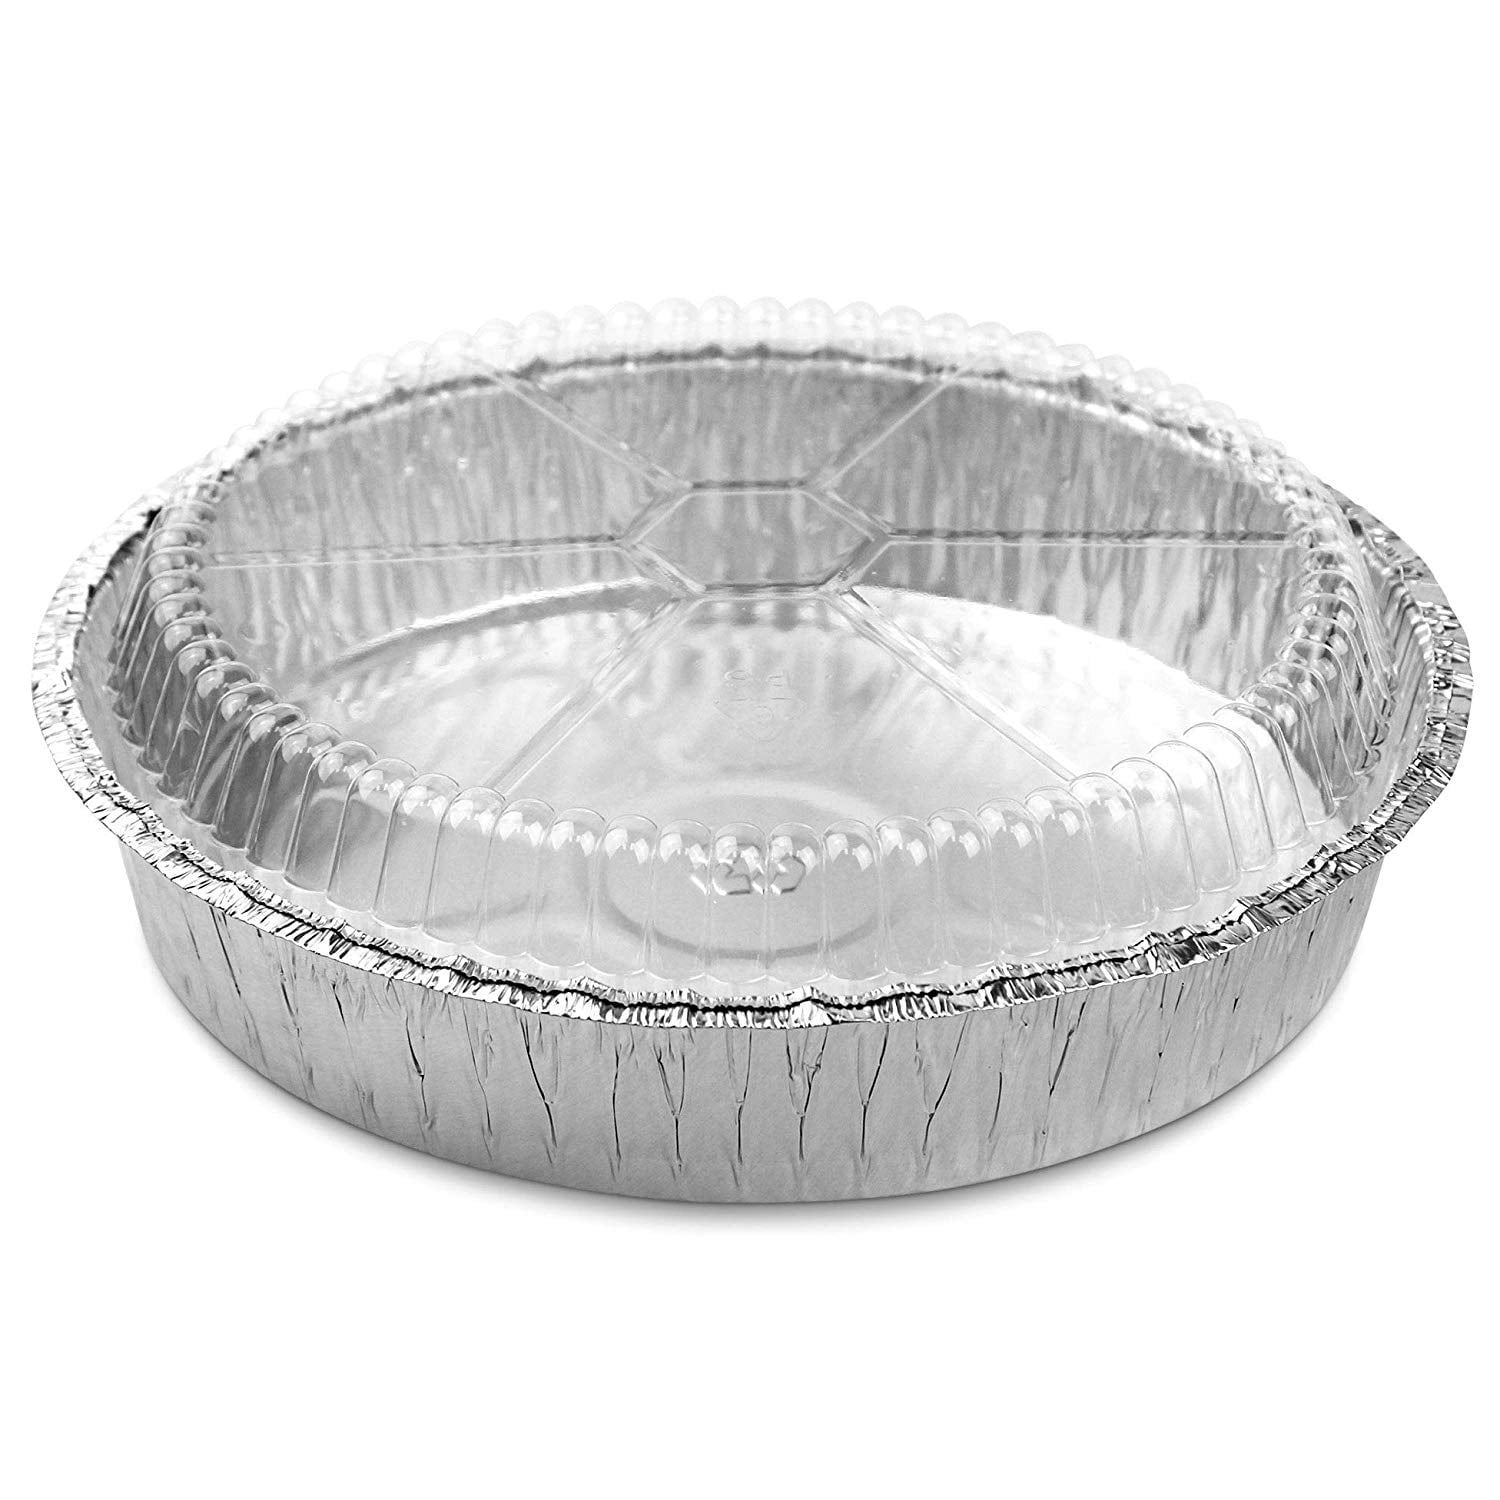 Snap-On Lids Container 7x5 Sturdy Foil Pans 5 Pack Disposable Aluminum Foil Pans for Baking Grill Oven Microwavable Multi-Use Pan Pot Cooking | 2X Thicker Heavy Duty Reusable Foil Tins 20oz